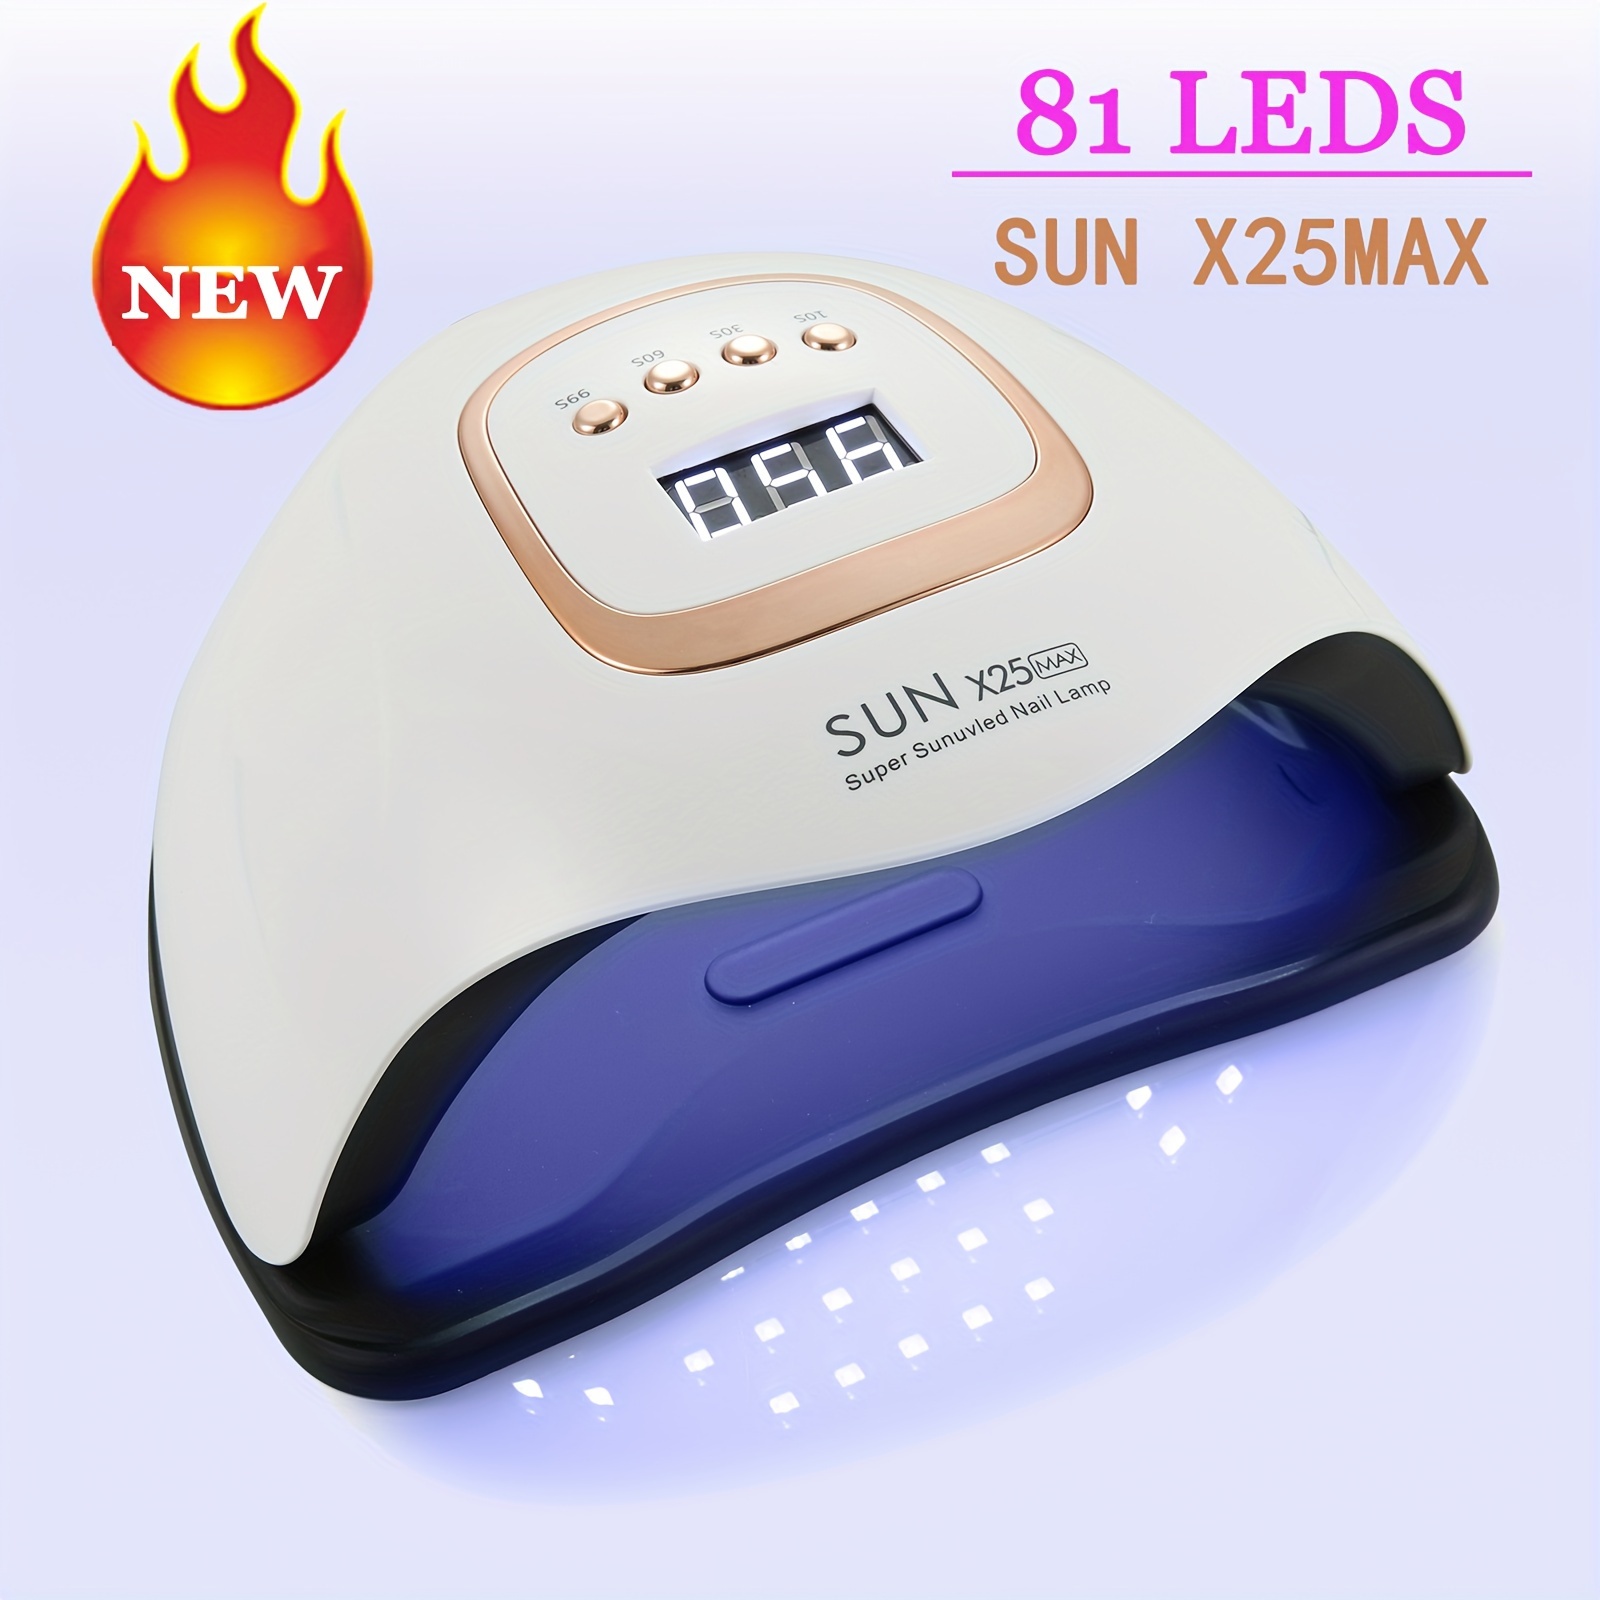 

New Nail Dryer Machine Quick Drying Uv Led Nail Lamps Gel Polish Curing Light 81 Leds With 4 Timing Auto Sense Phototherapy Manicure Equipment-us Plug